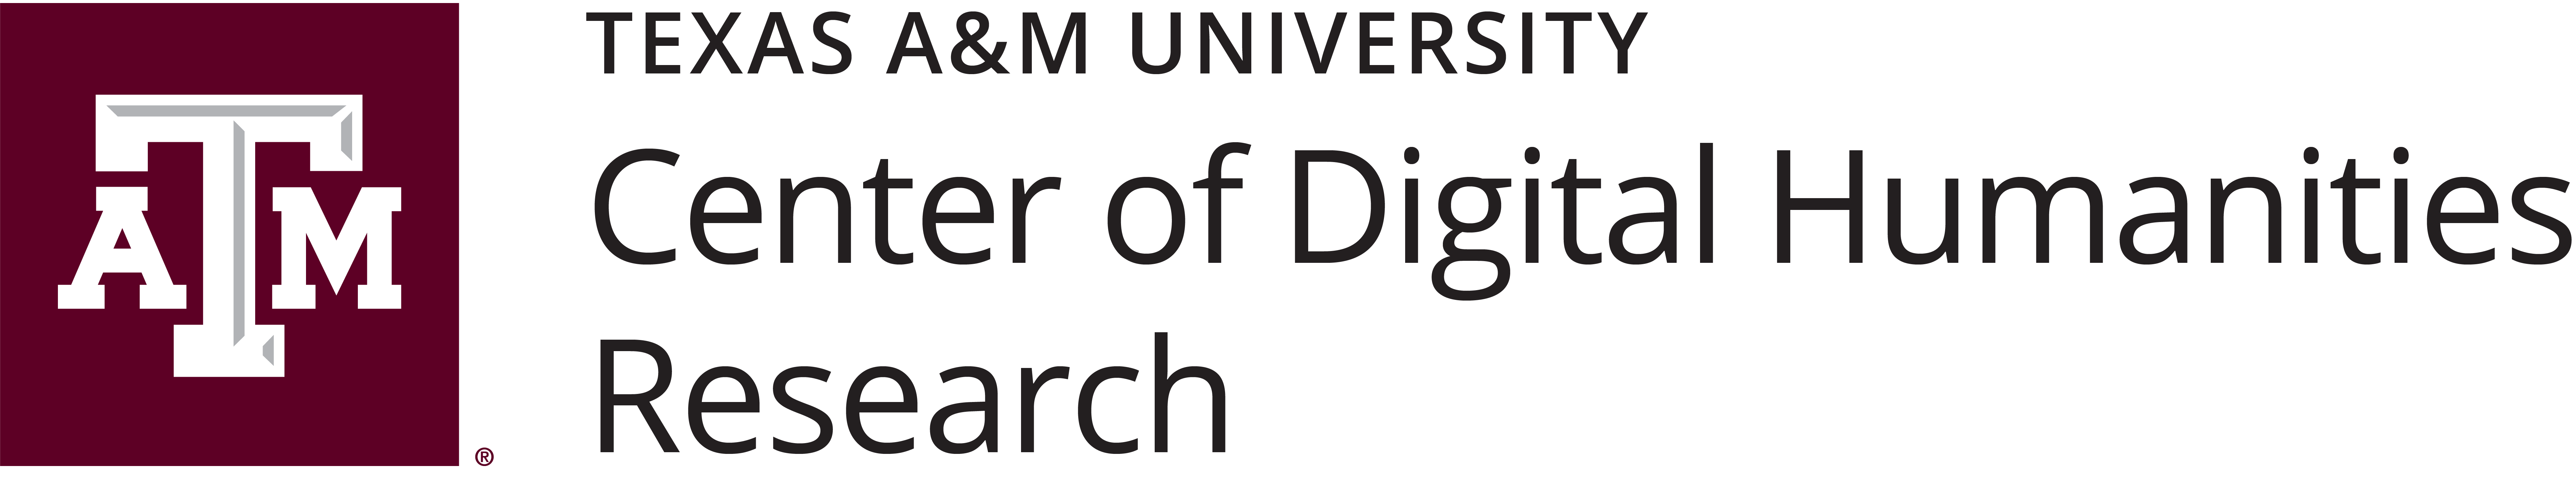 Initiative for Digital Humanities, Media, and Culture, Texas A&M